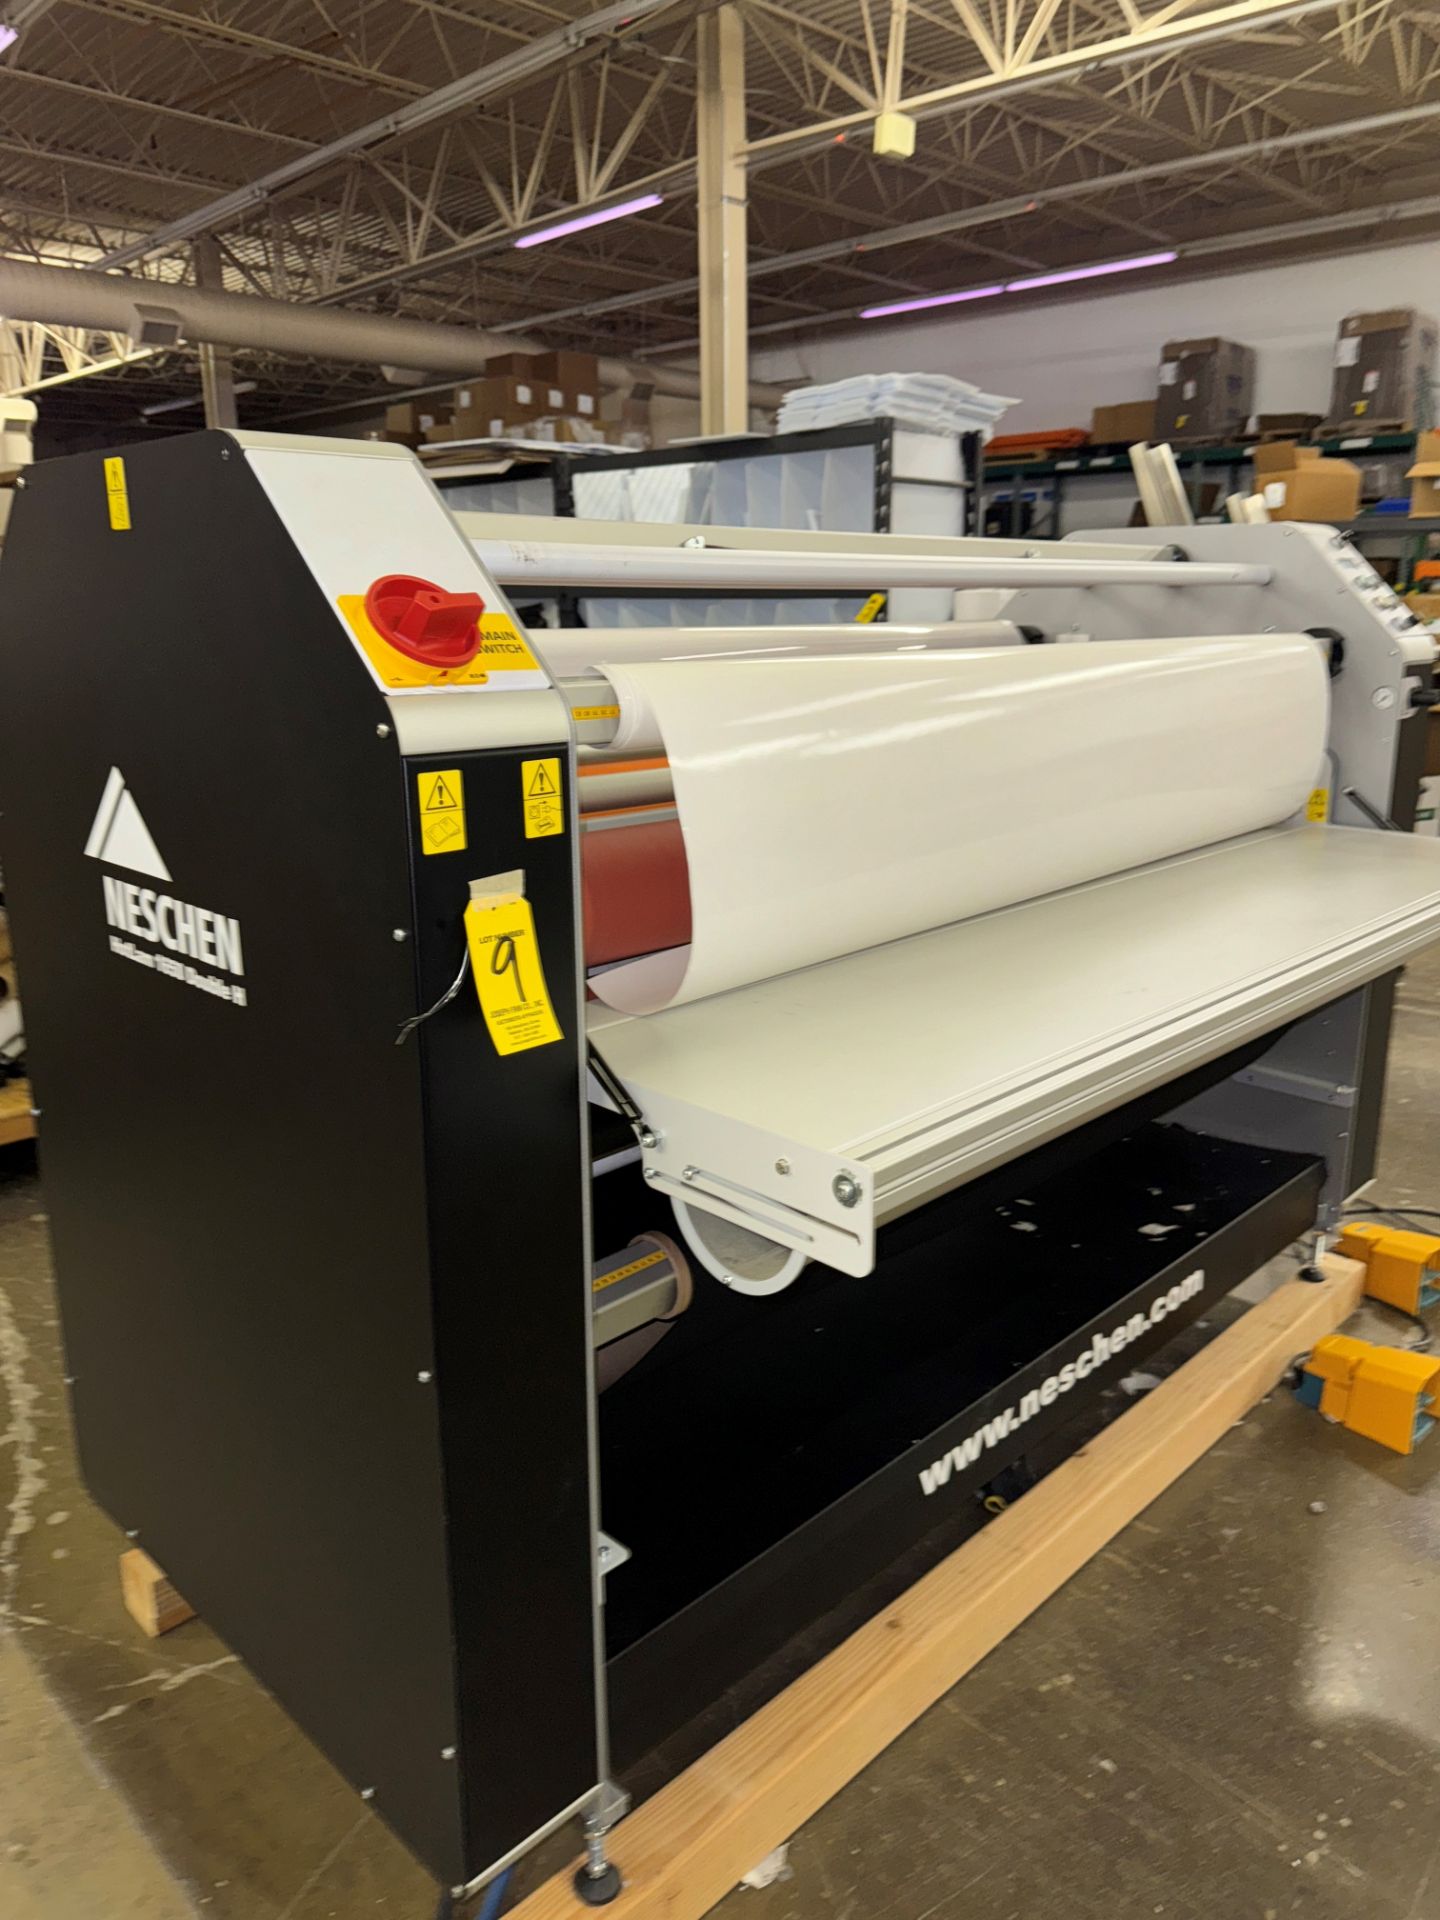 2021 Neschen HotLam 1650 Double H-US Large Format Double Heated Laminati | Rig Fee $420 - Image 5 of 5